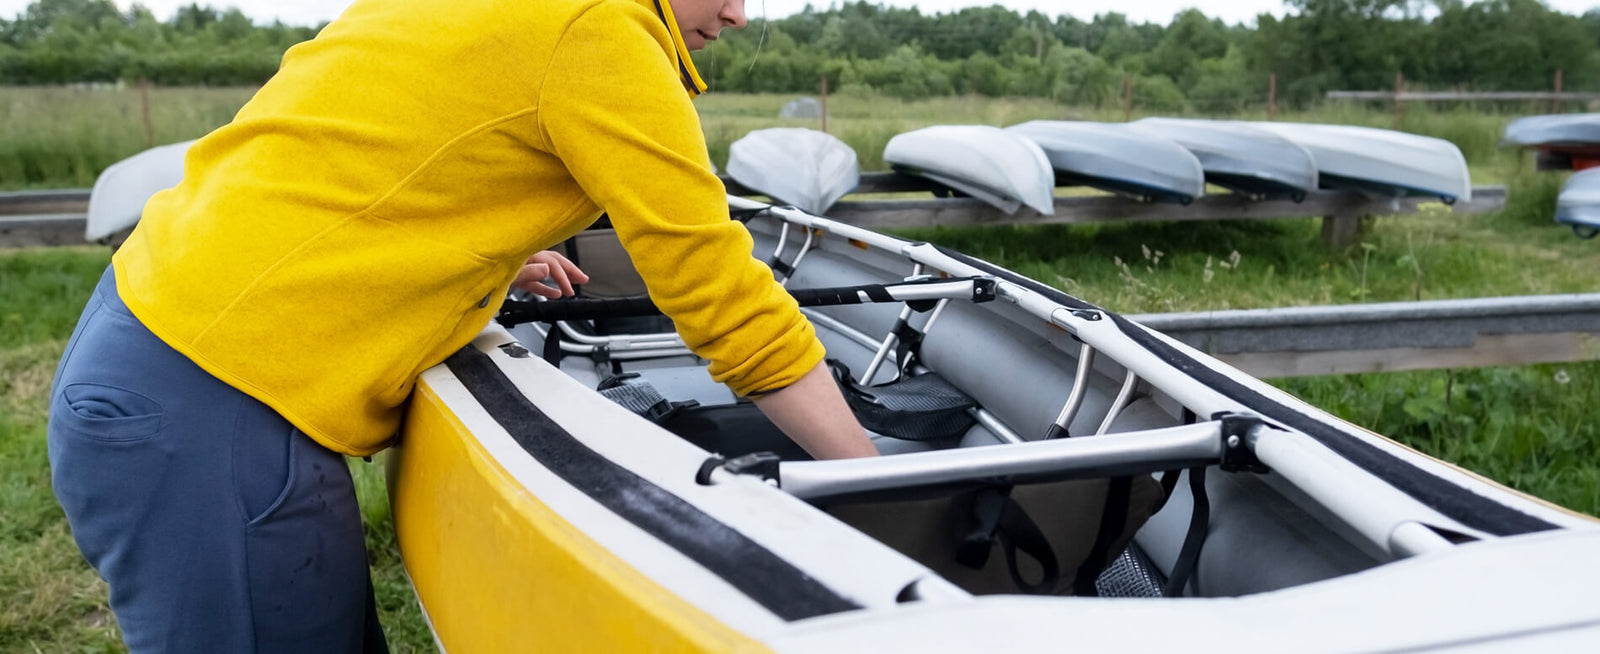 10 'Must Have' Kayak Fishing Accessories (Holiday Gift Guide